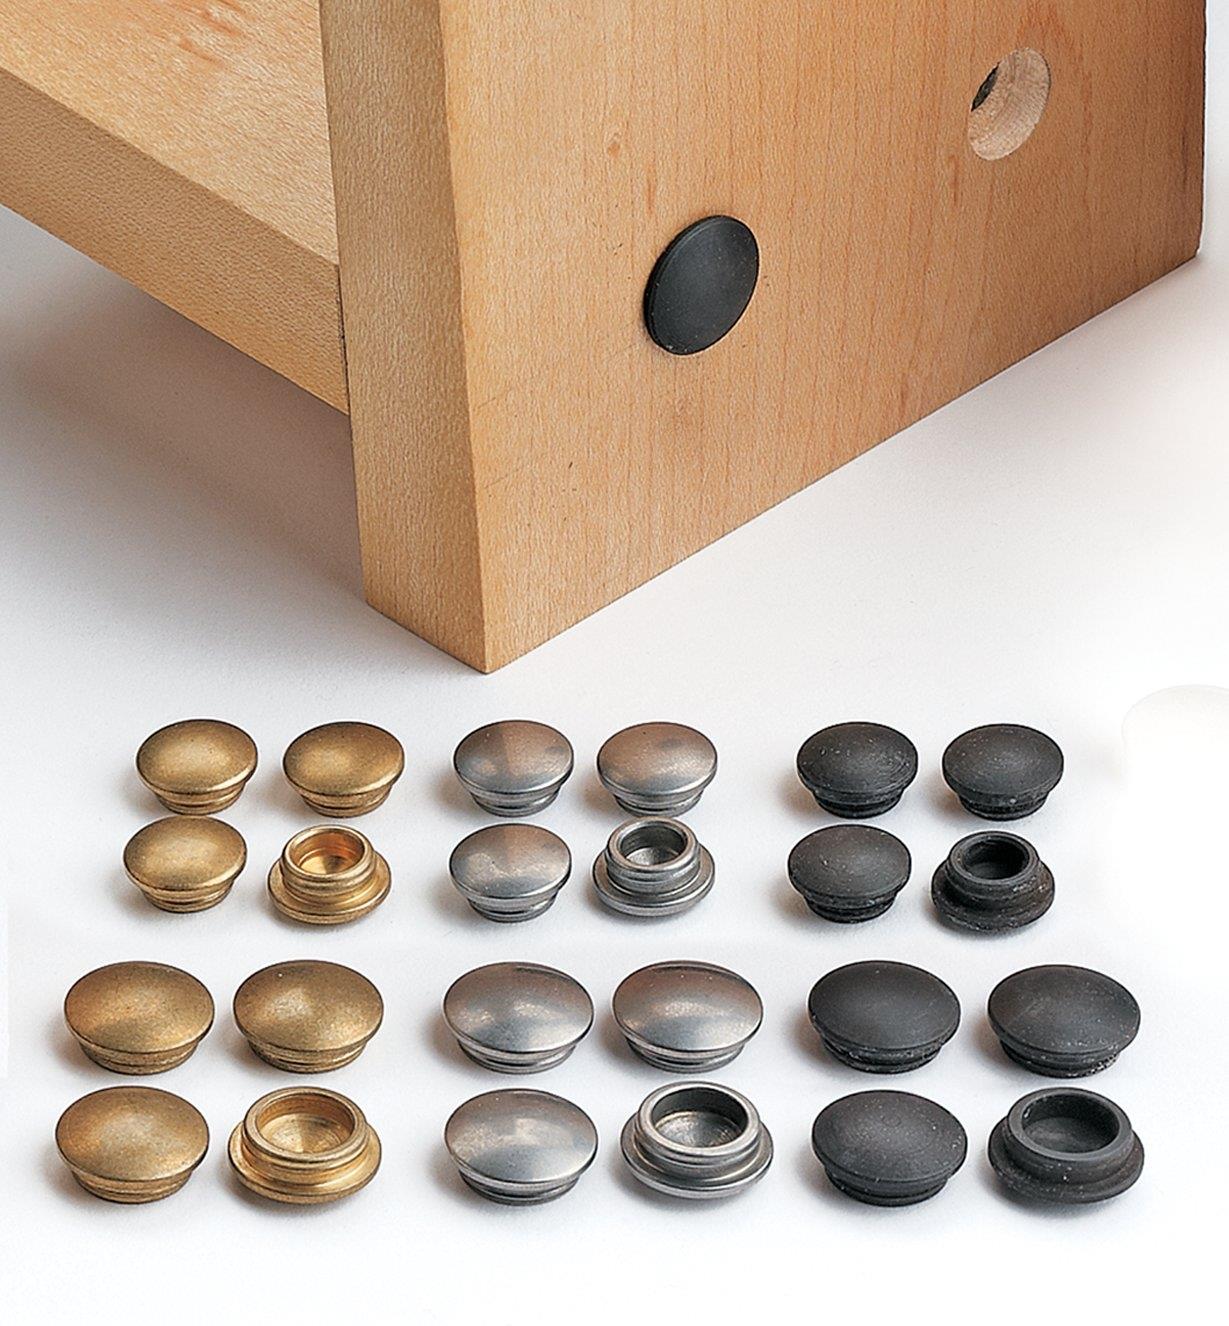 All three finishes of Decorative Hole Plugs arranged in front of a furniture piece with plugs installed